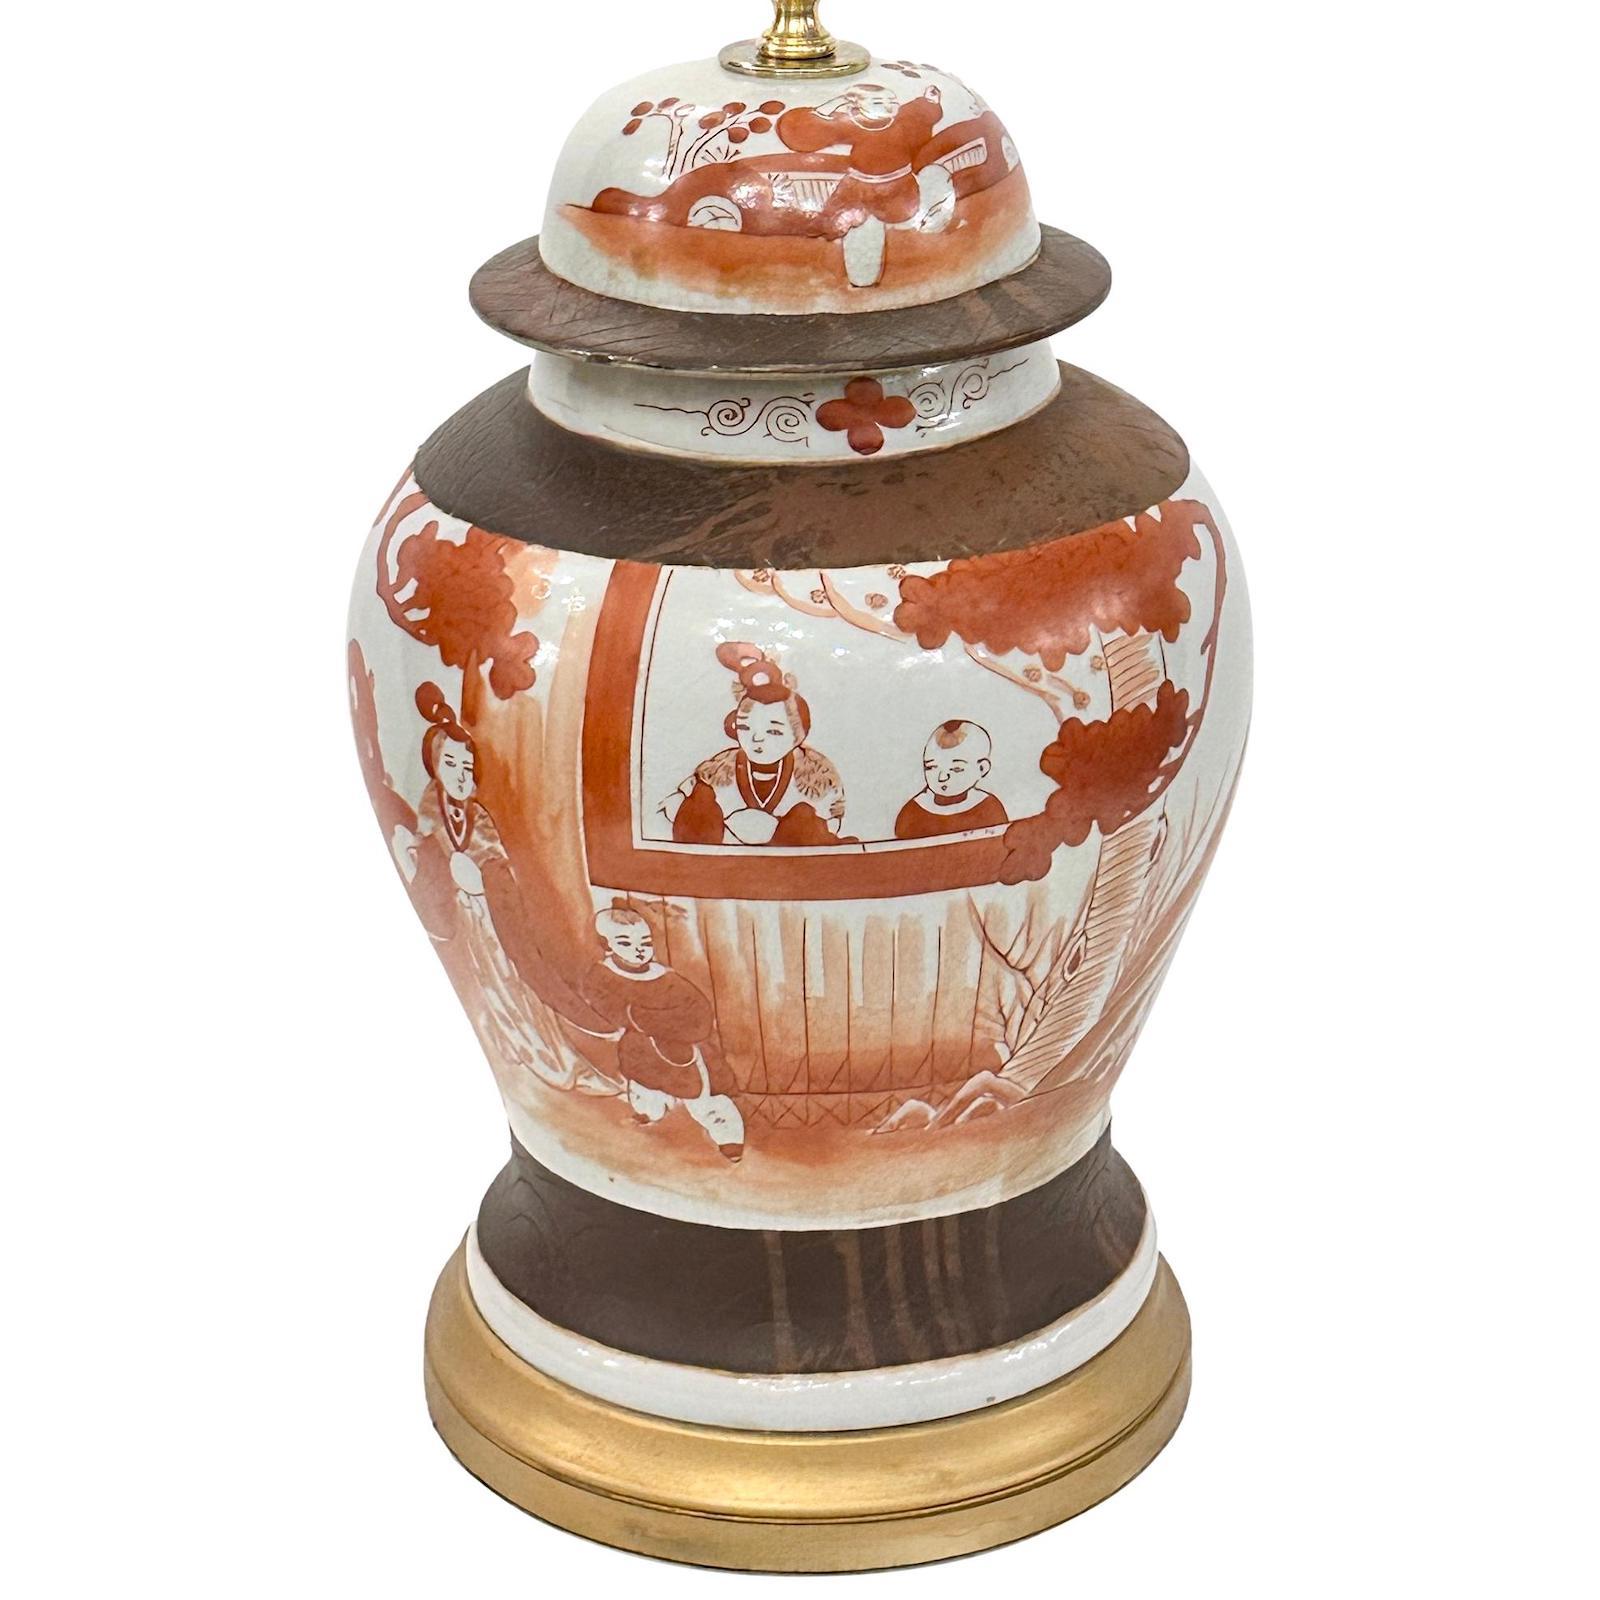 Pair of circa 1920's Chinese porcelain table lamps with court scenes.

Measurements:
Height of body: 16